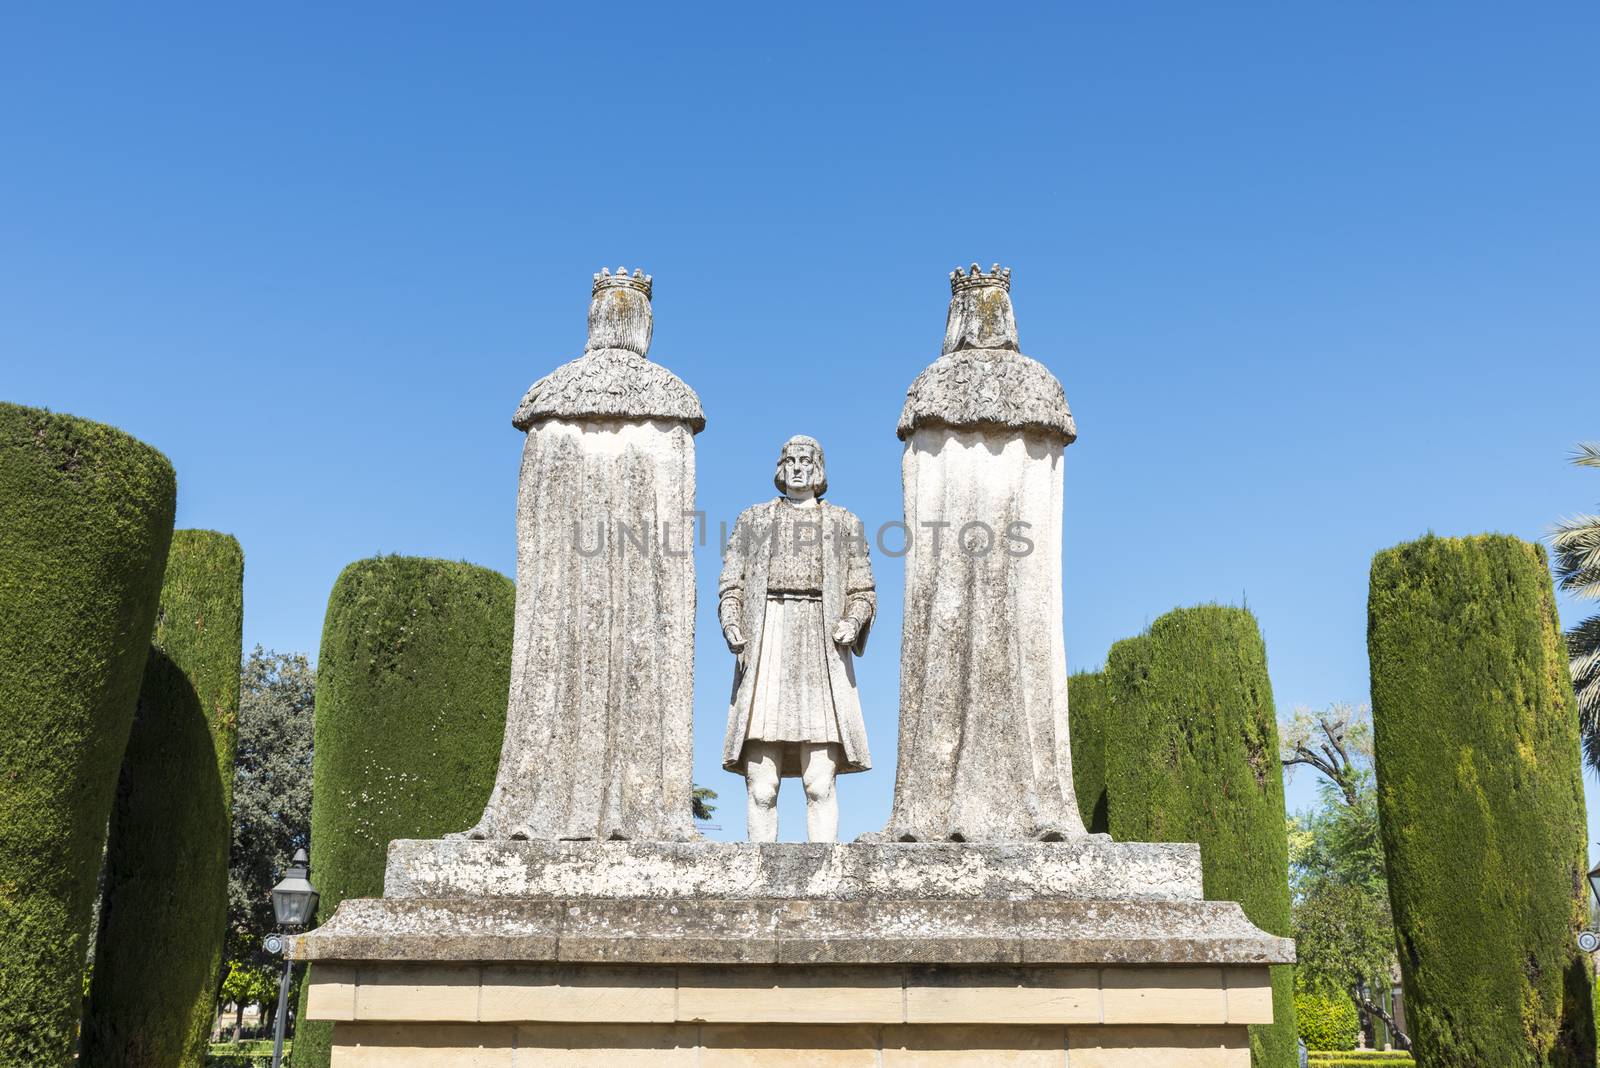 Old Stone Statues of the Christian Kings with Cristobal Colon in the gardens of the Alcazar in Cordoba Spain